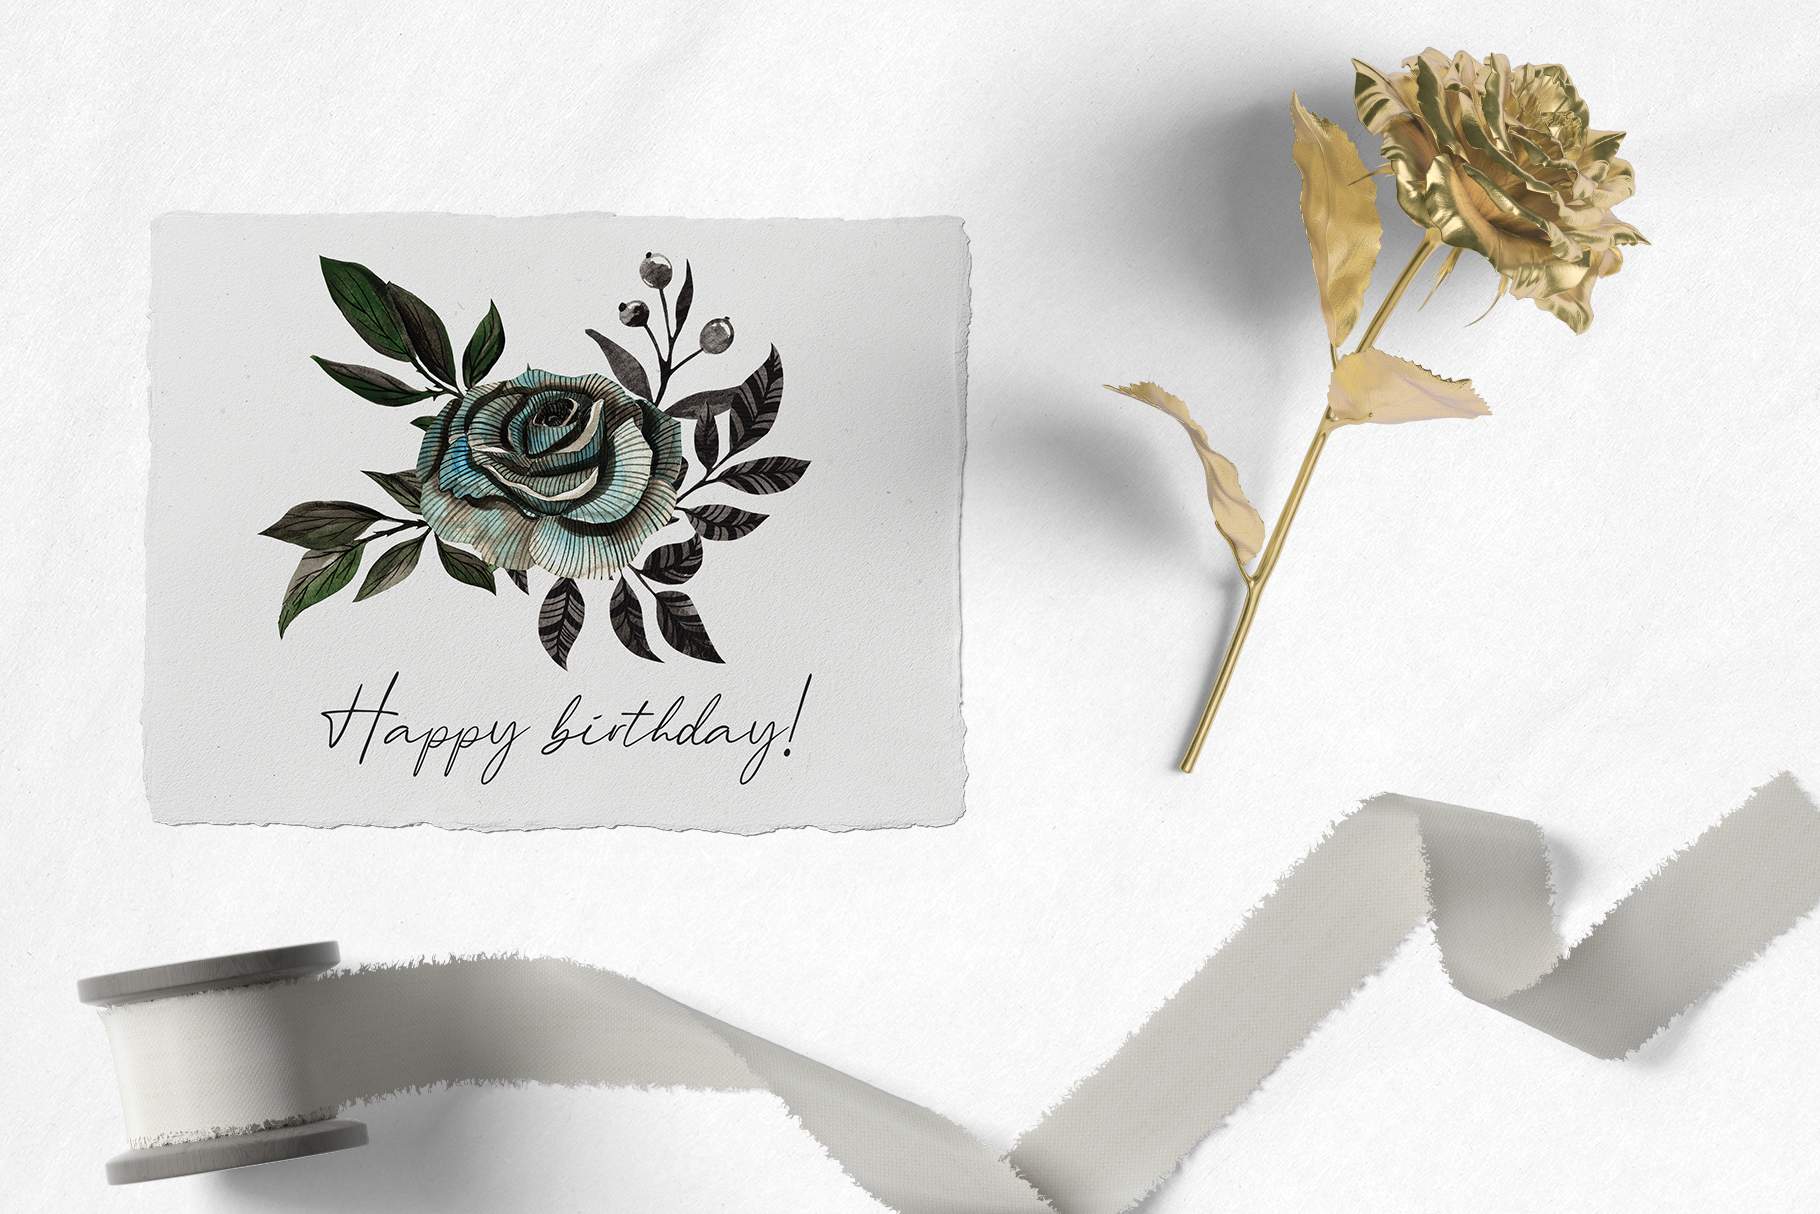 Card with a rose and a ribbon on it.